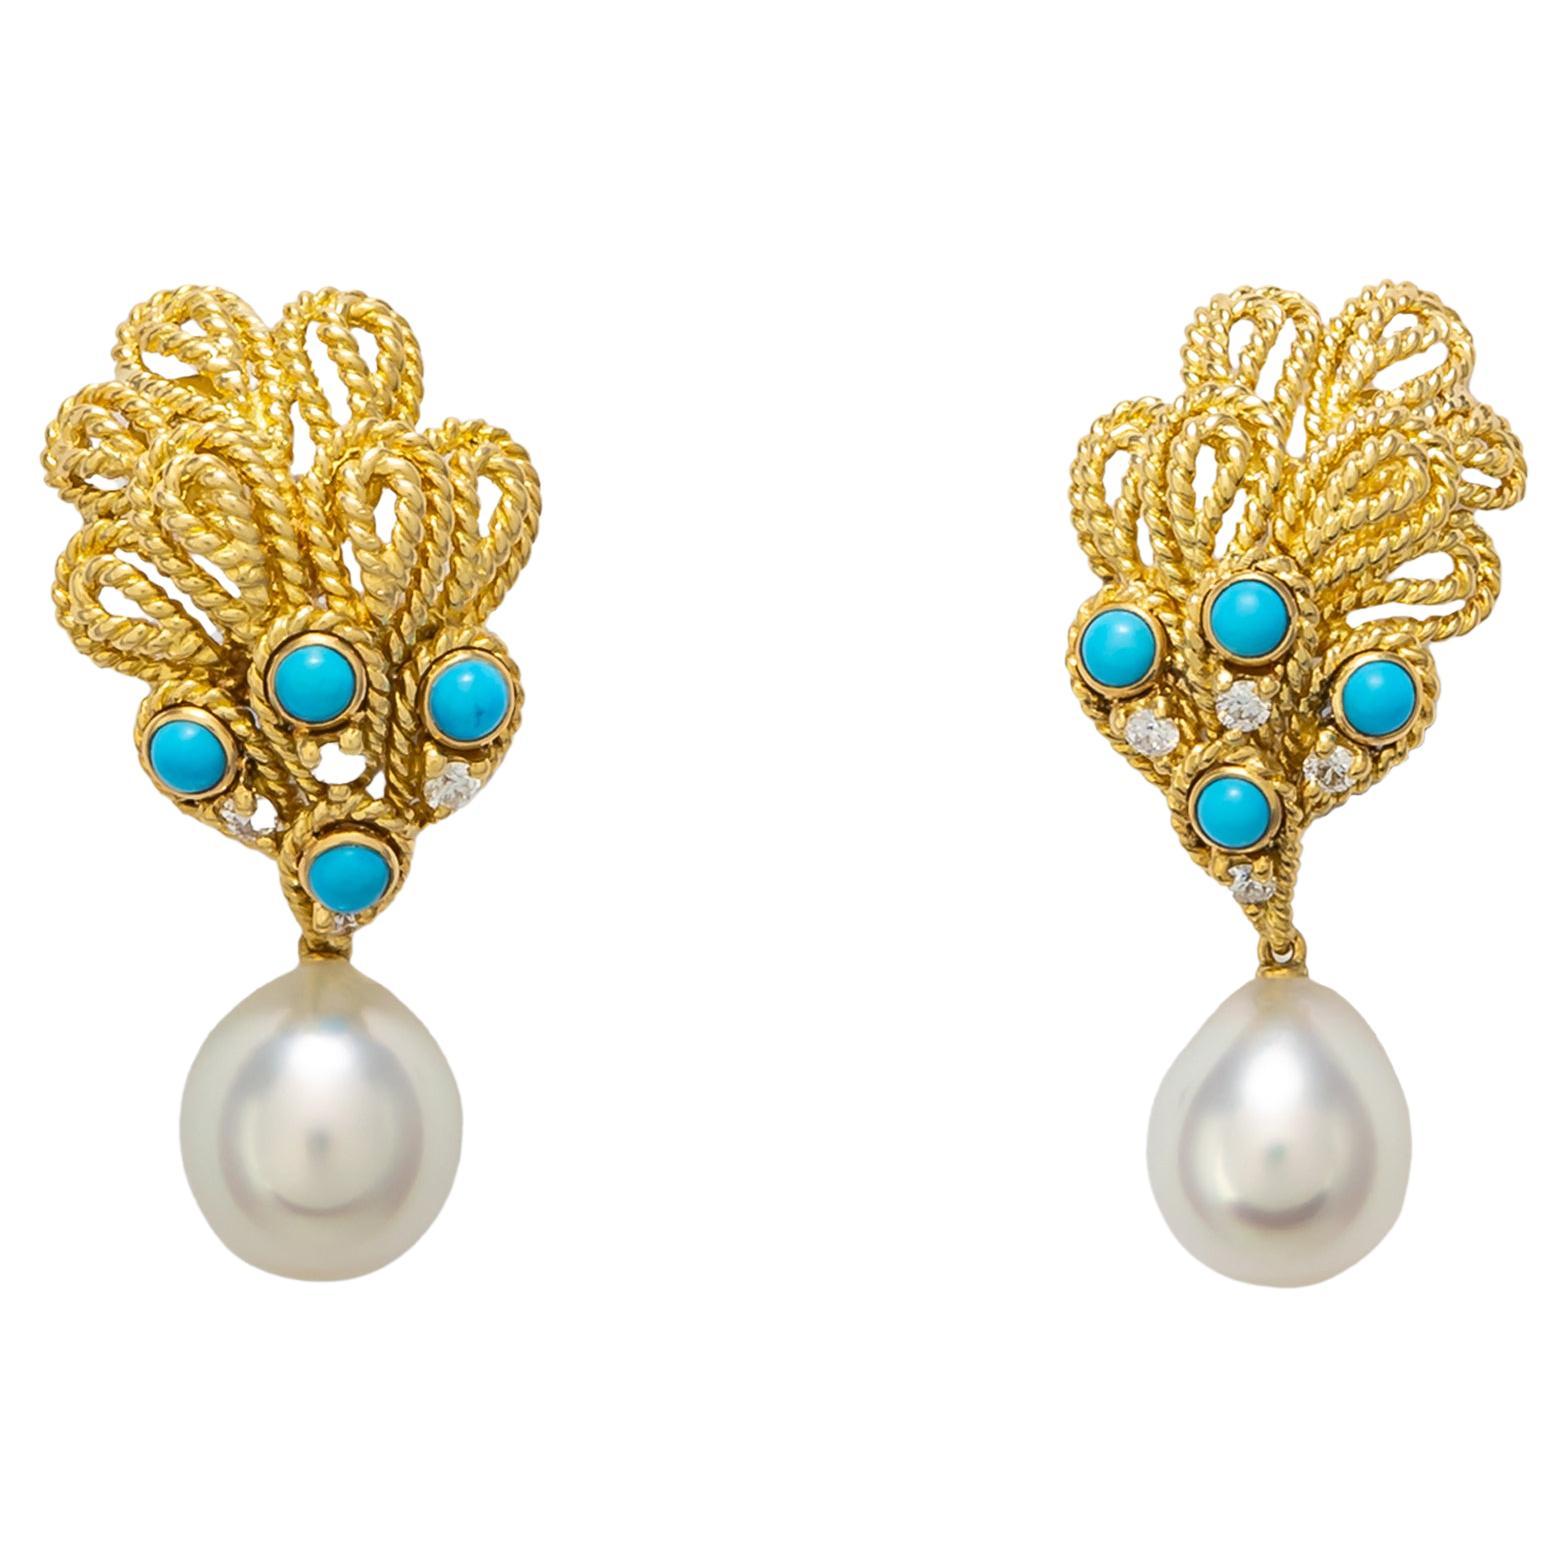 Tiffany & Co. Pearl Turquoise and Diamond Earrings